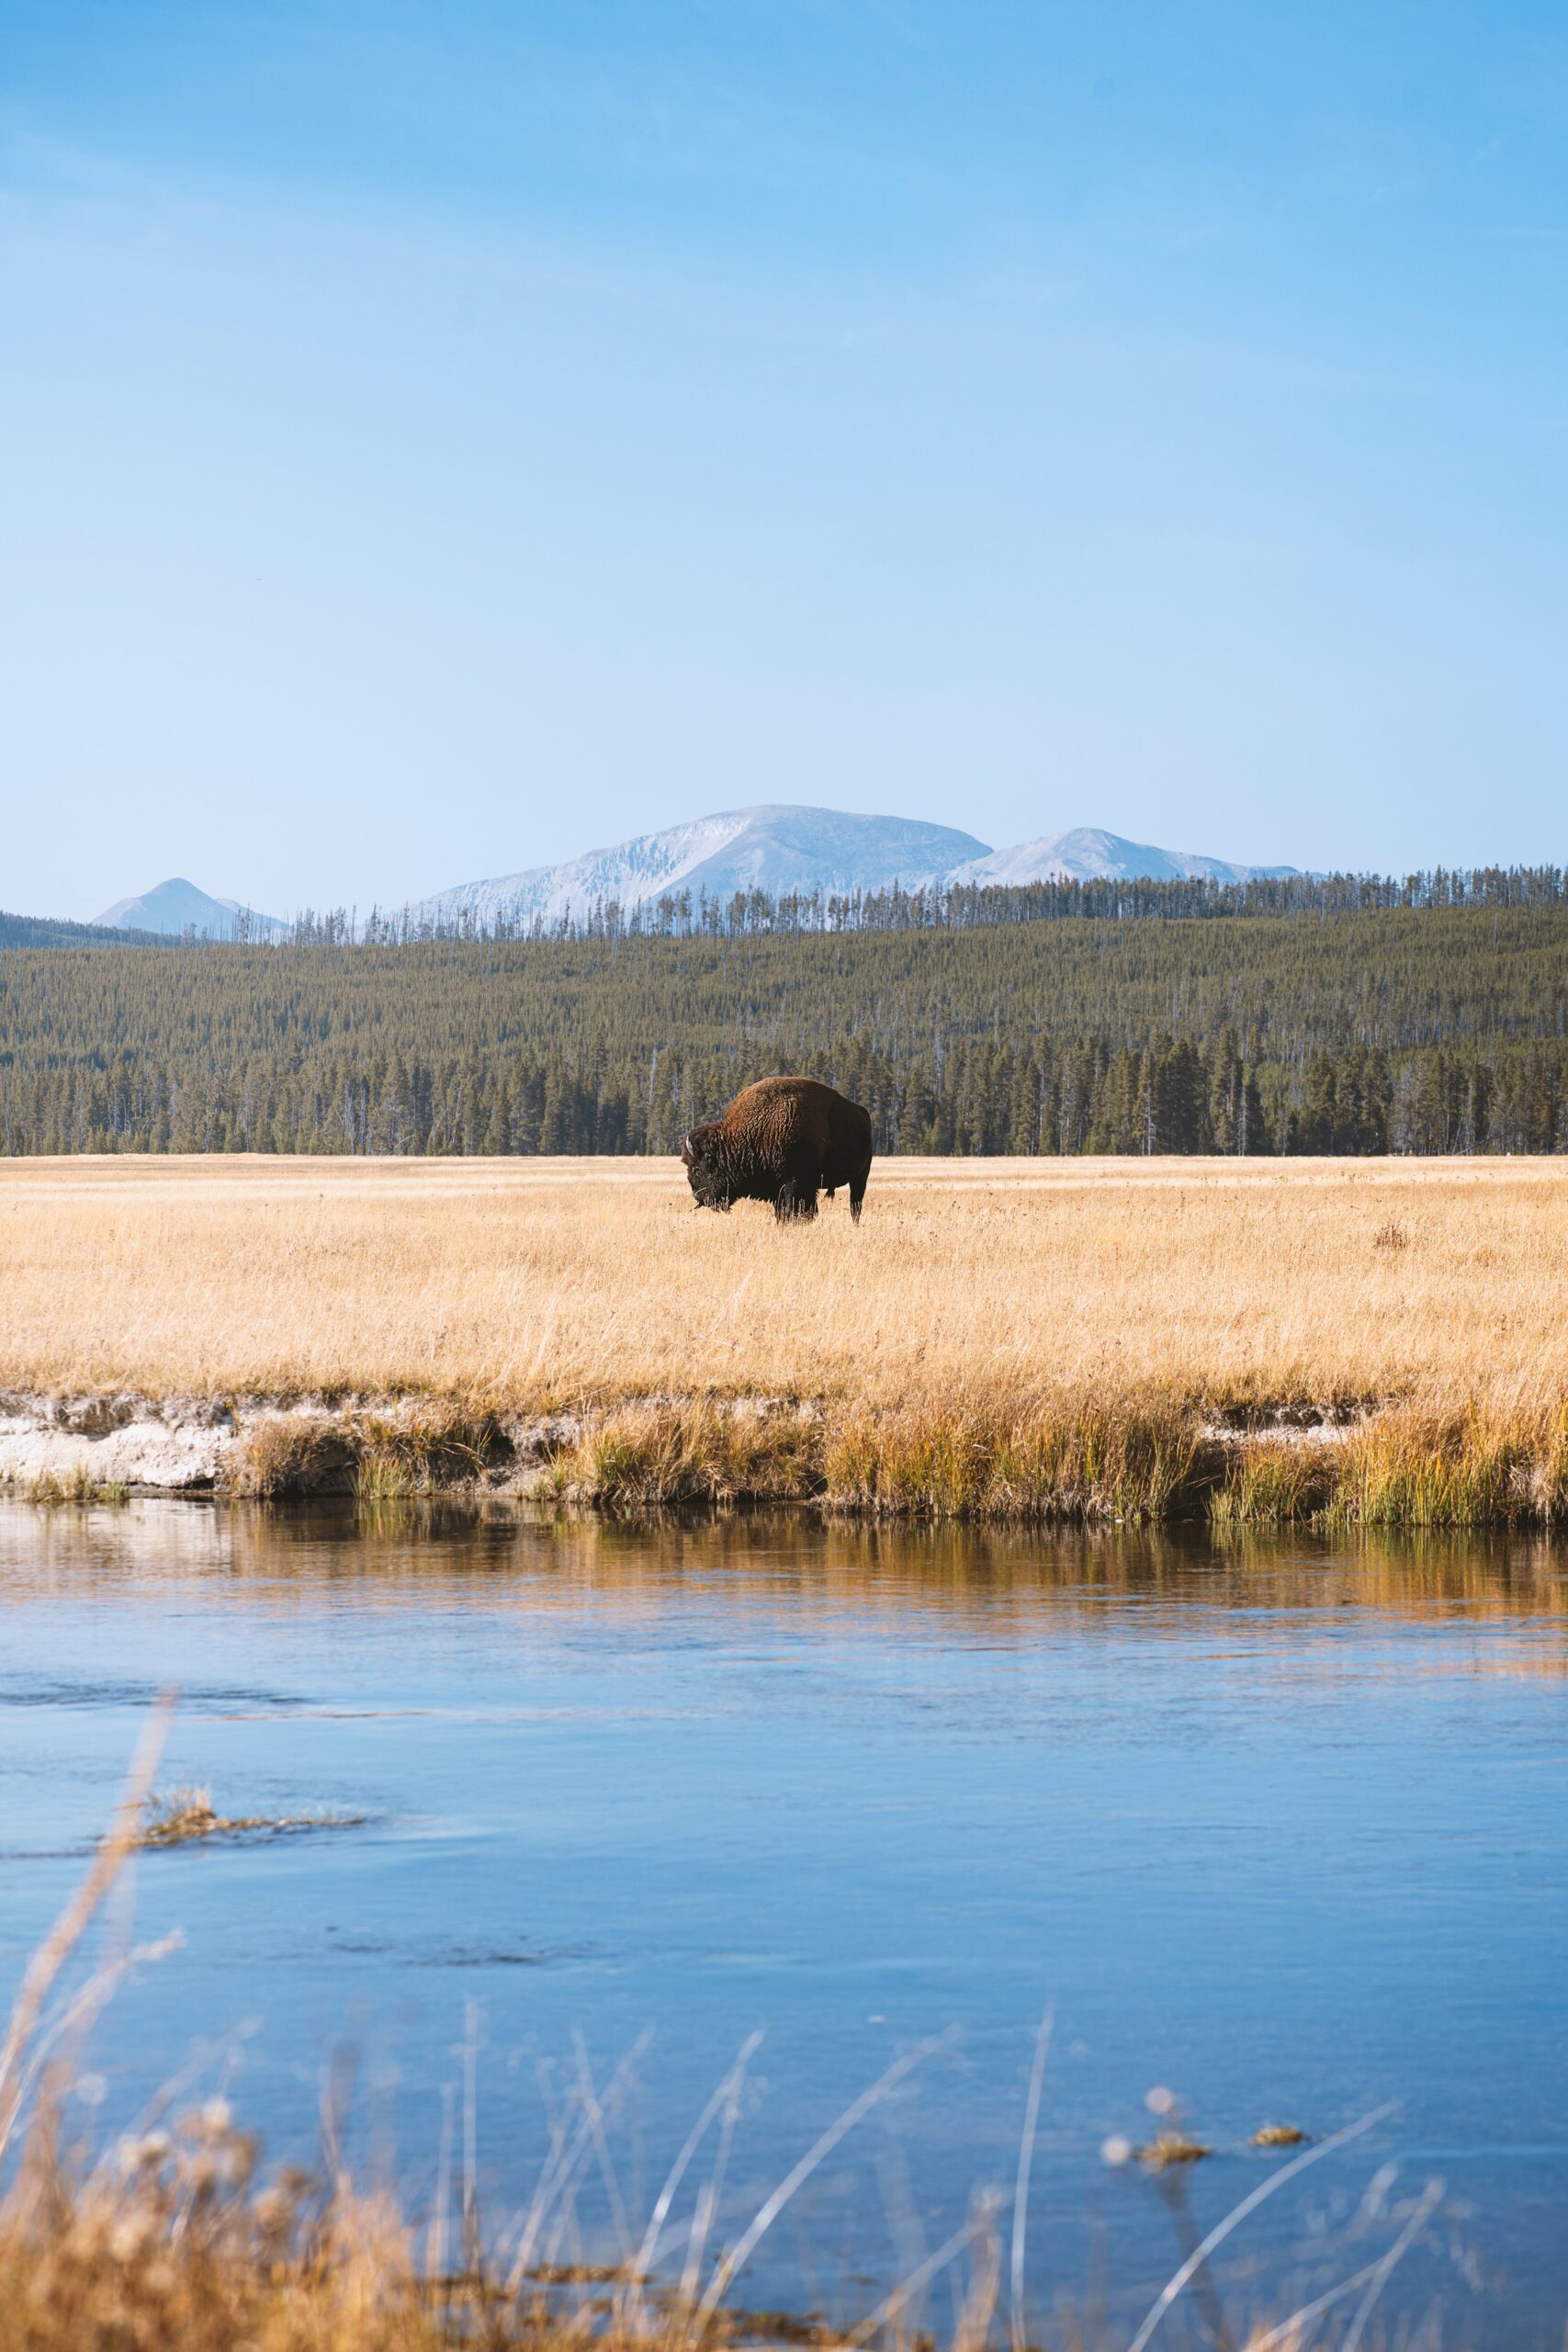 New report shows the oldest US national park is under threat from global heating